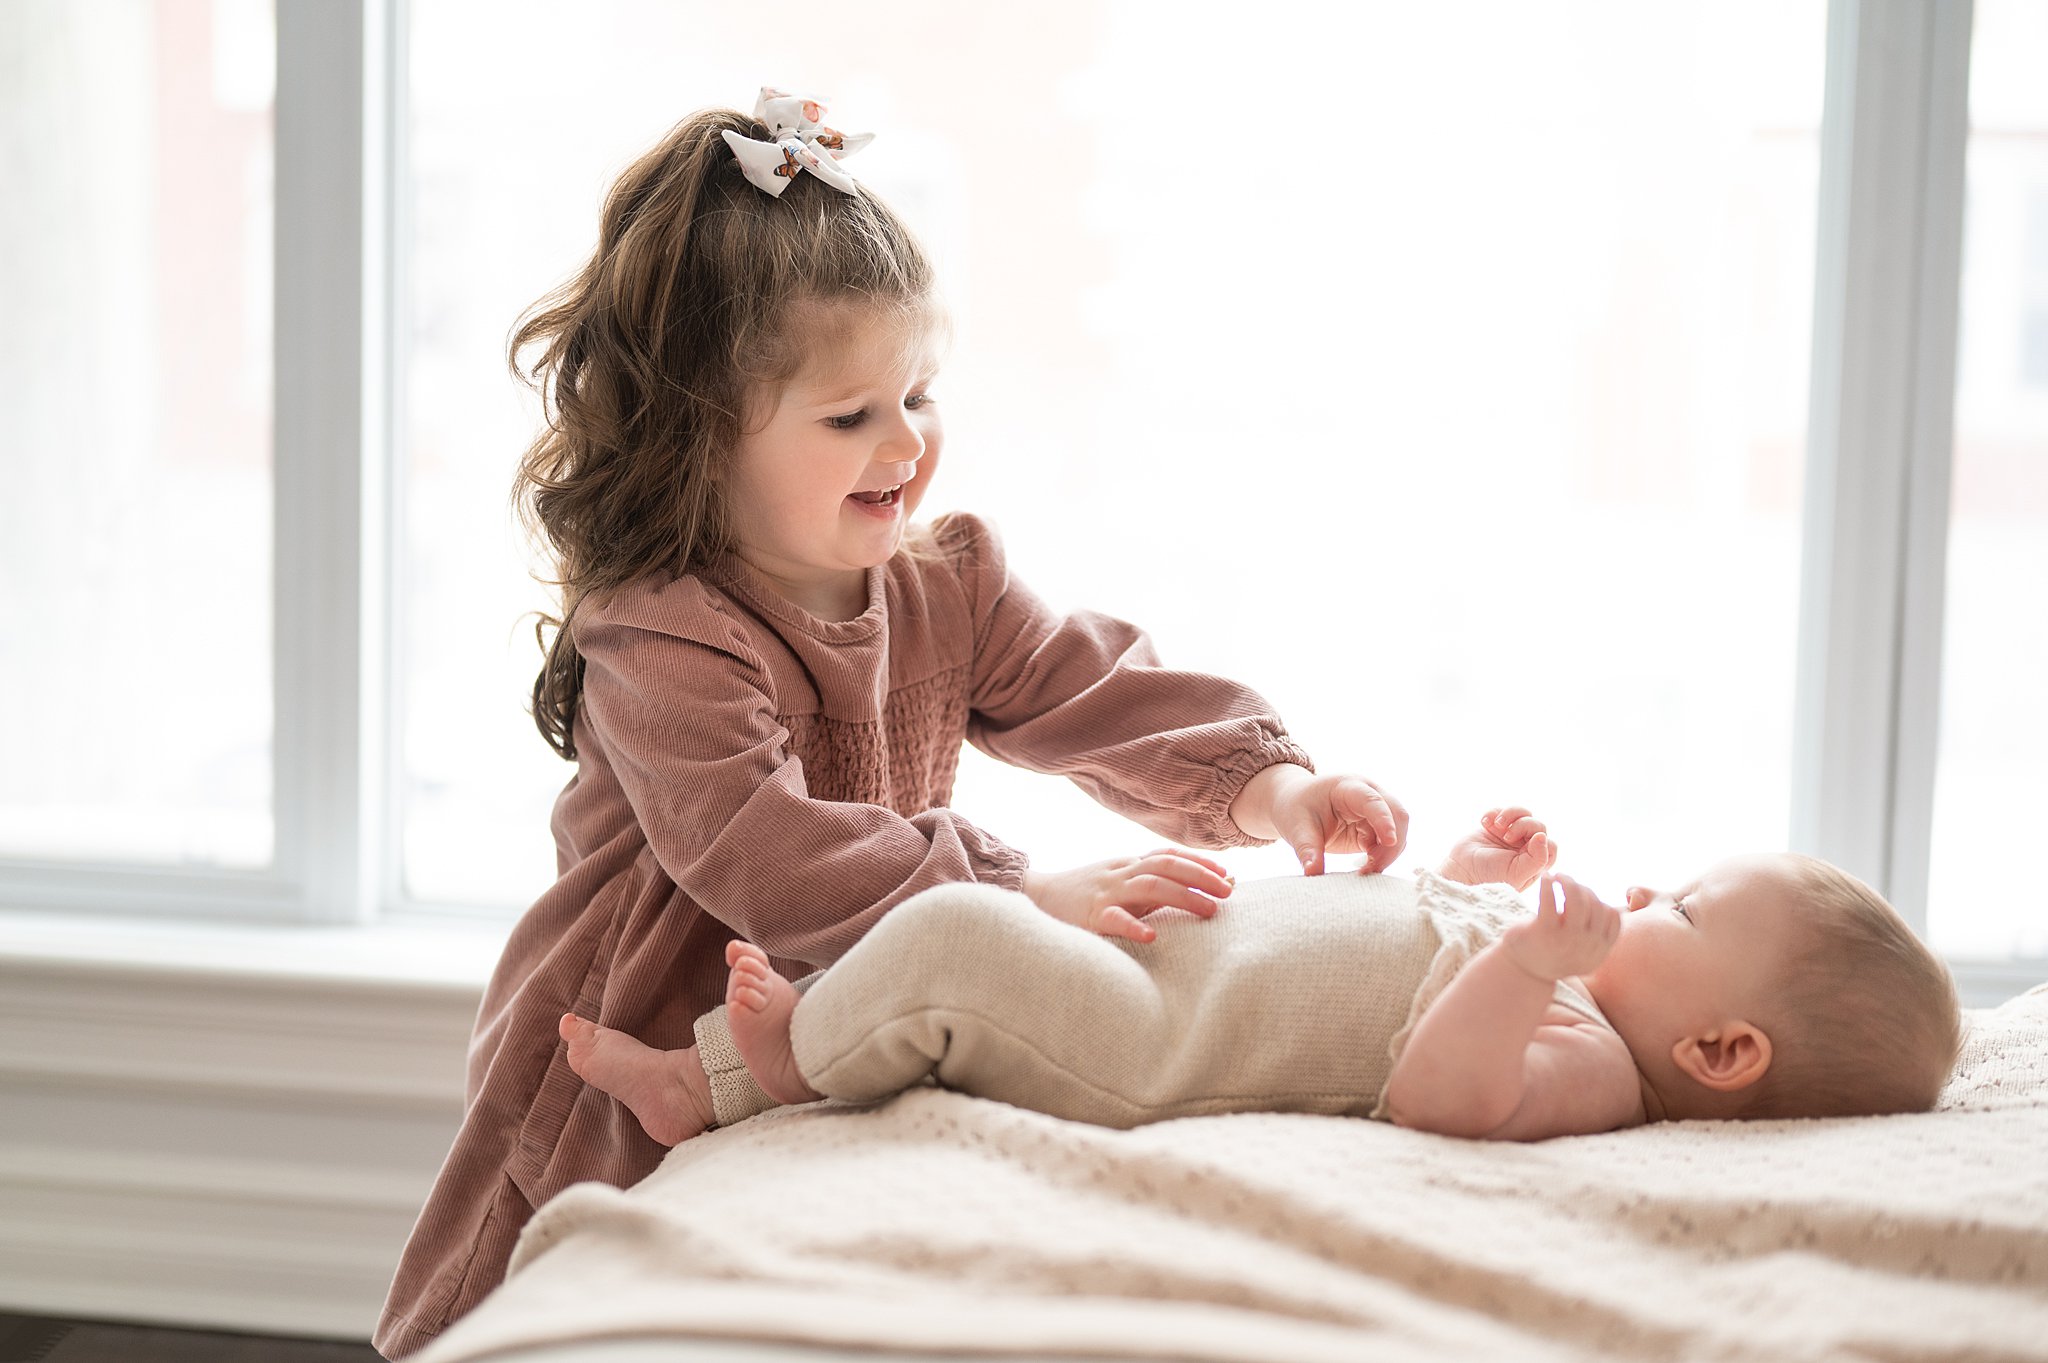 little girl playing with her newborn baby sibling on a bed